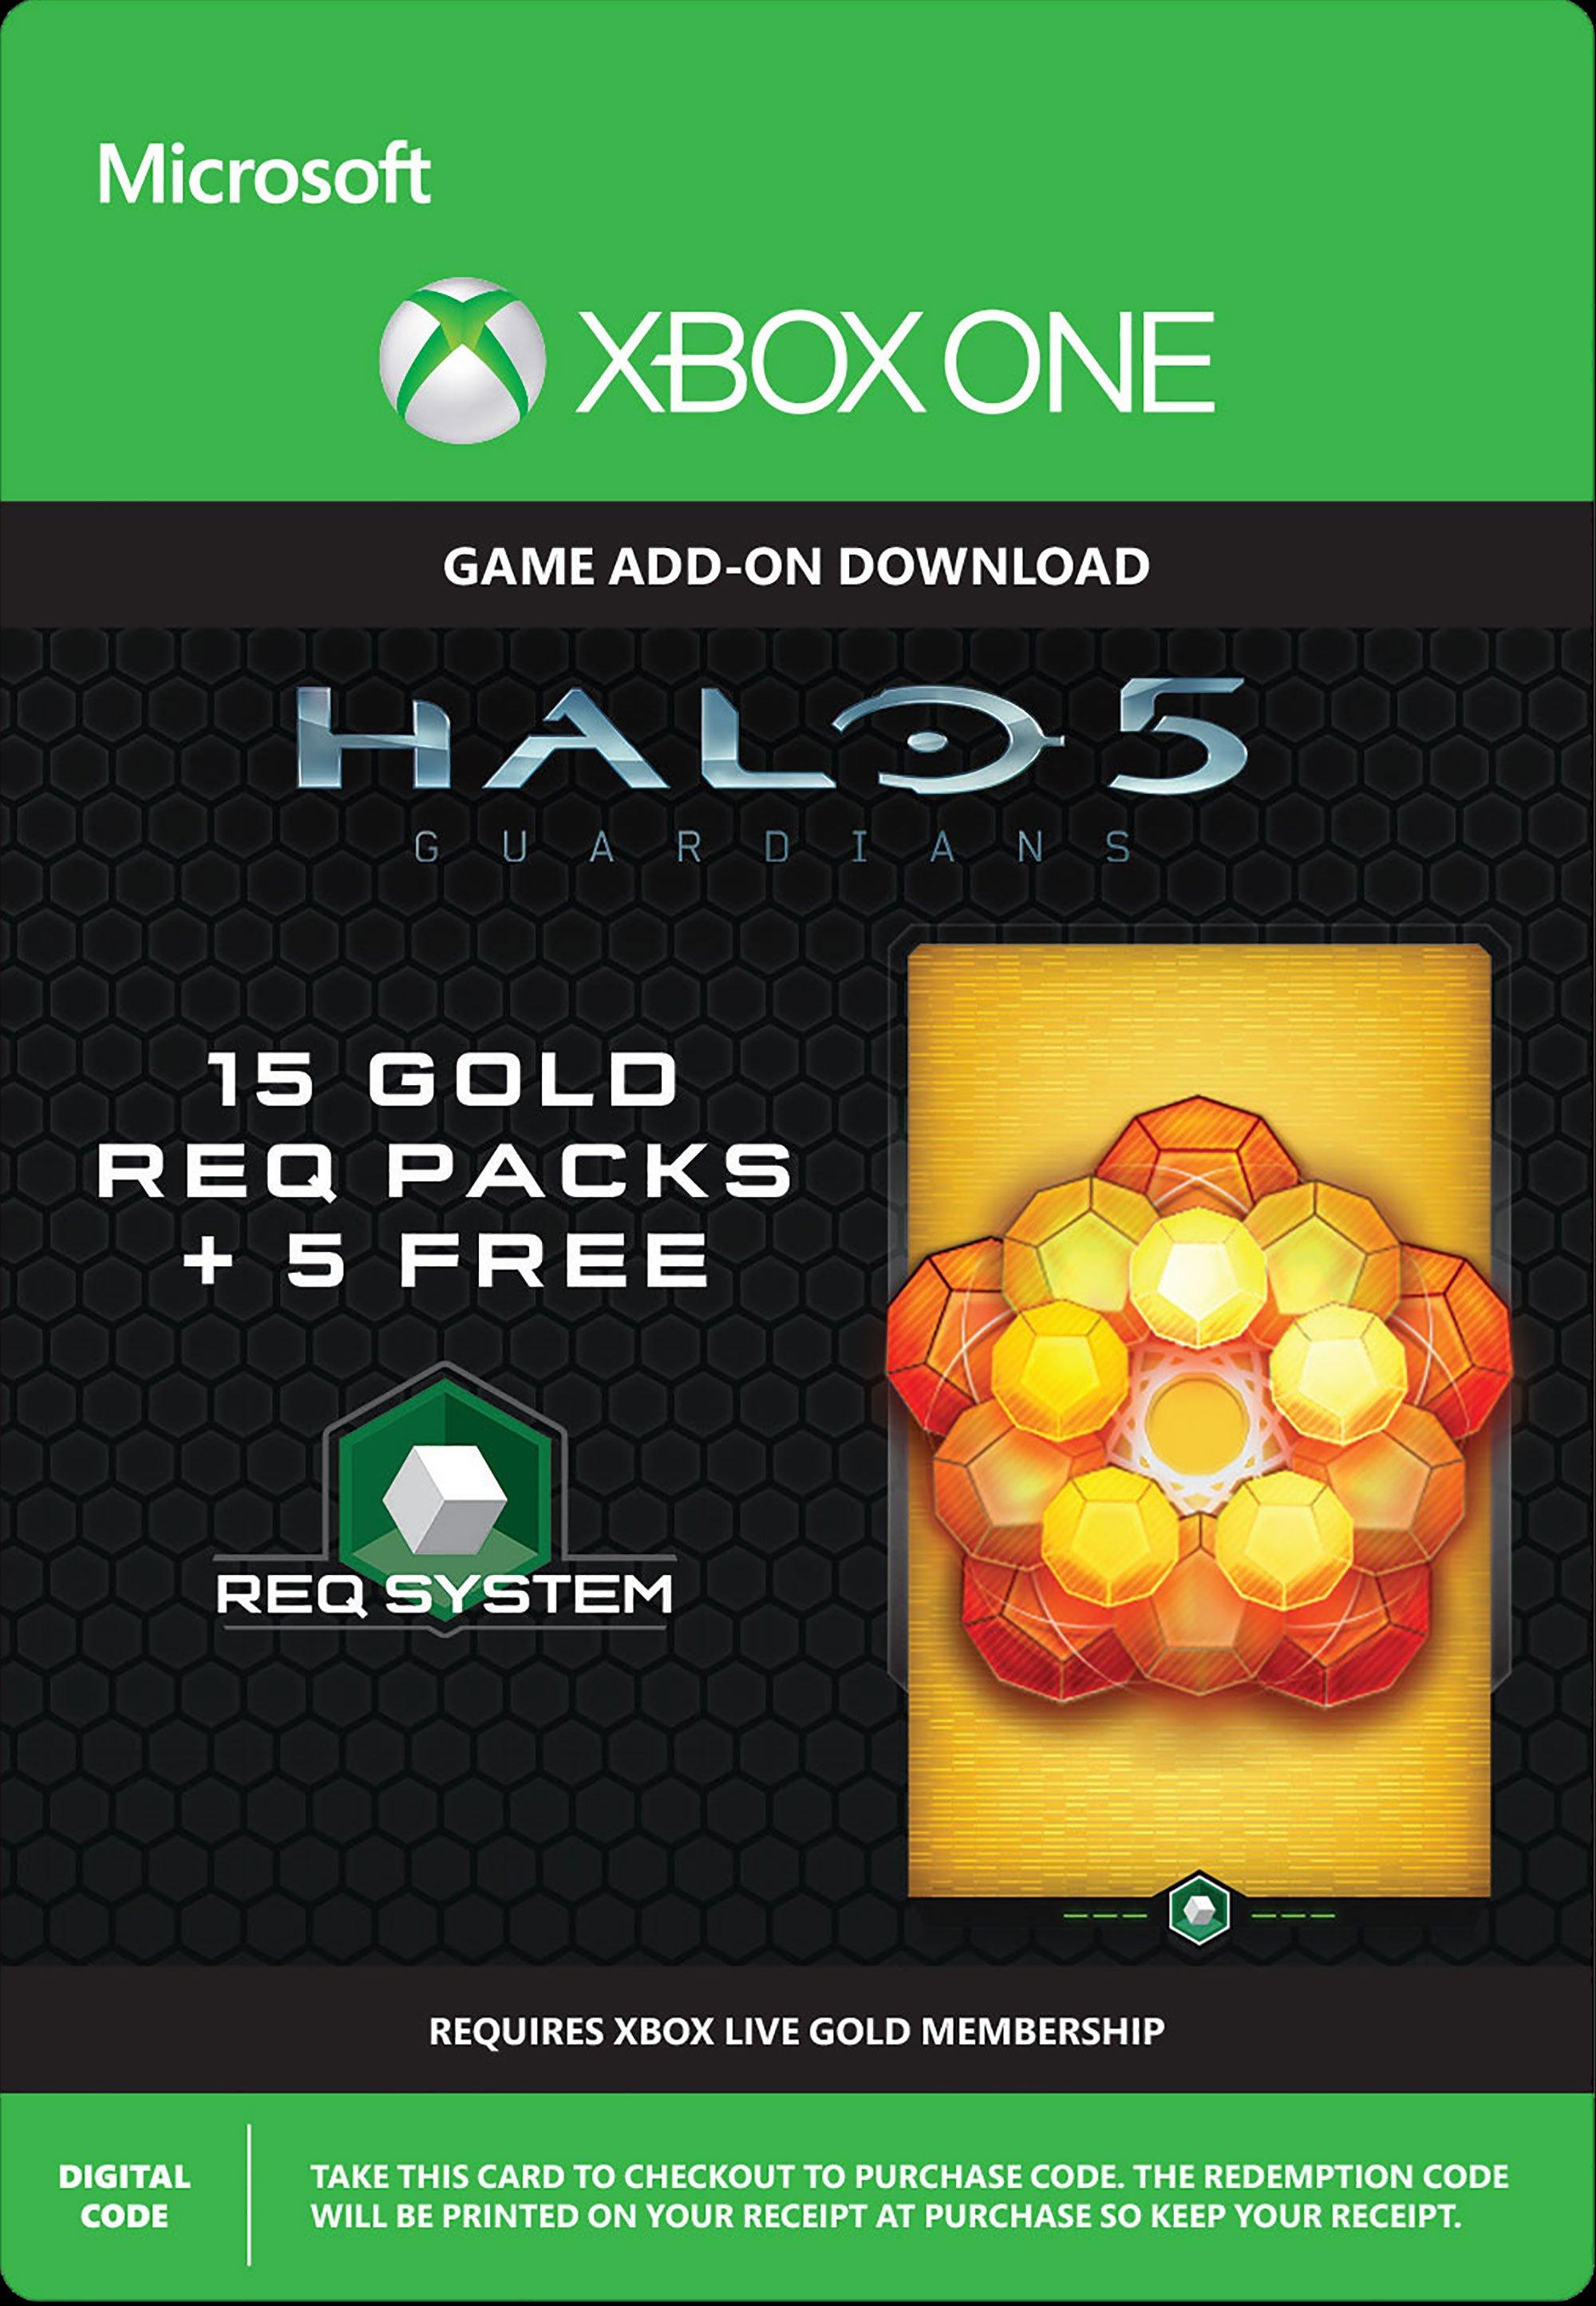 Halo 5: Guardians 15 Gold Req Packs DLC and 5 Free - Xbox One